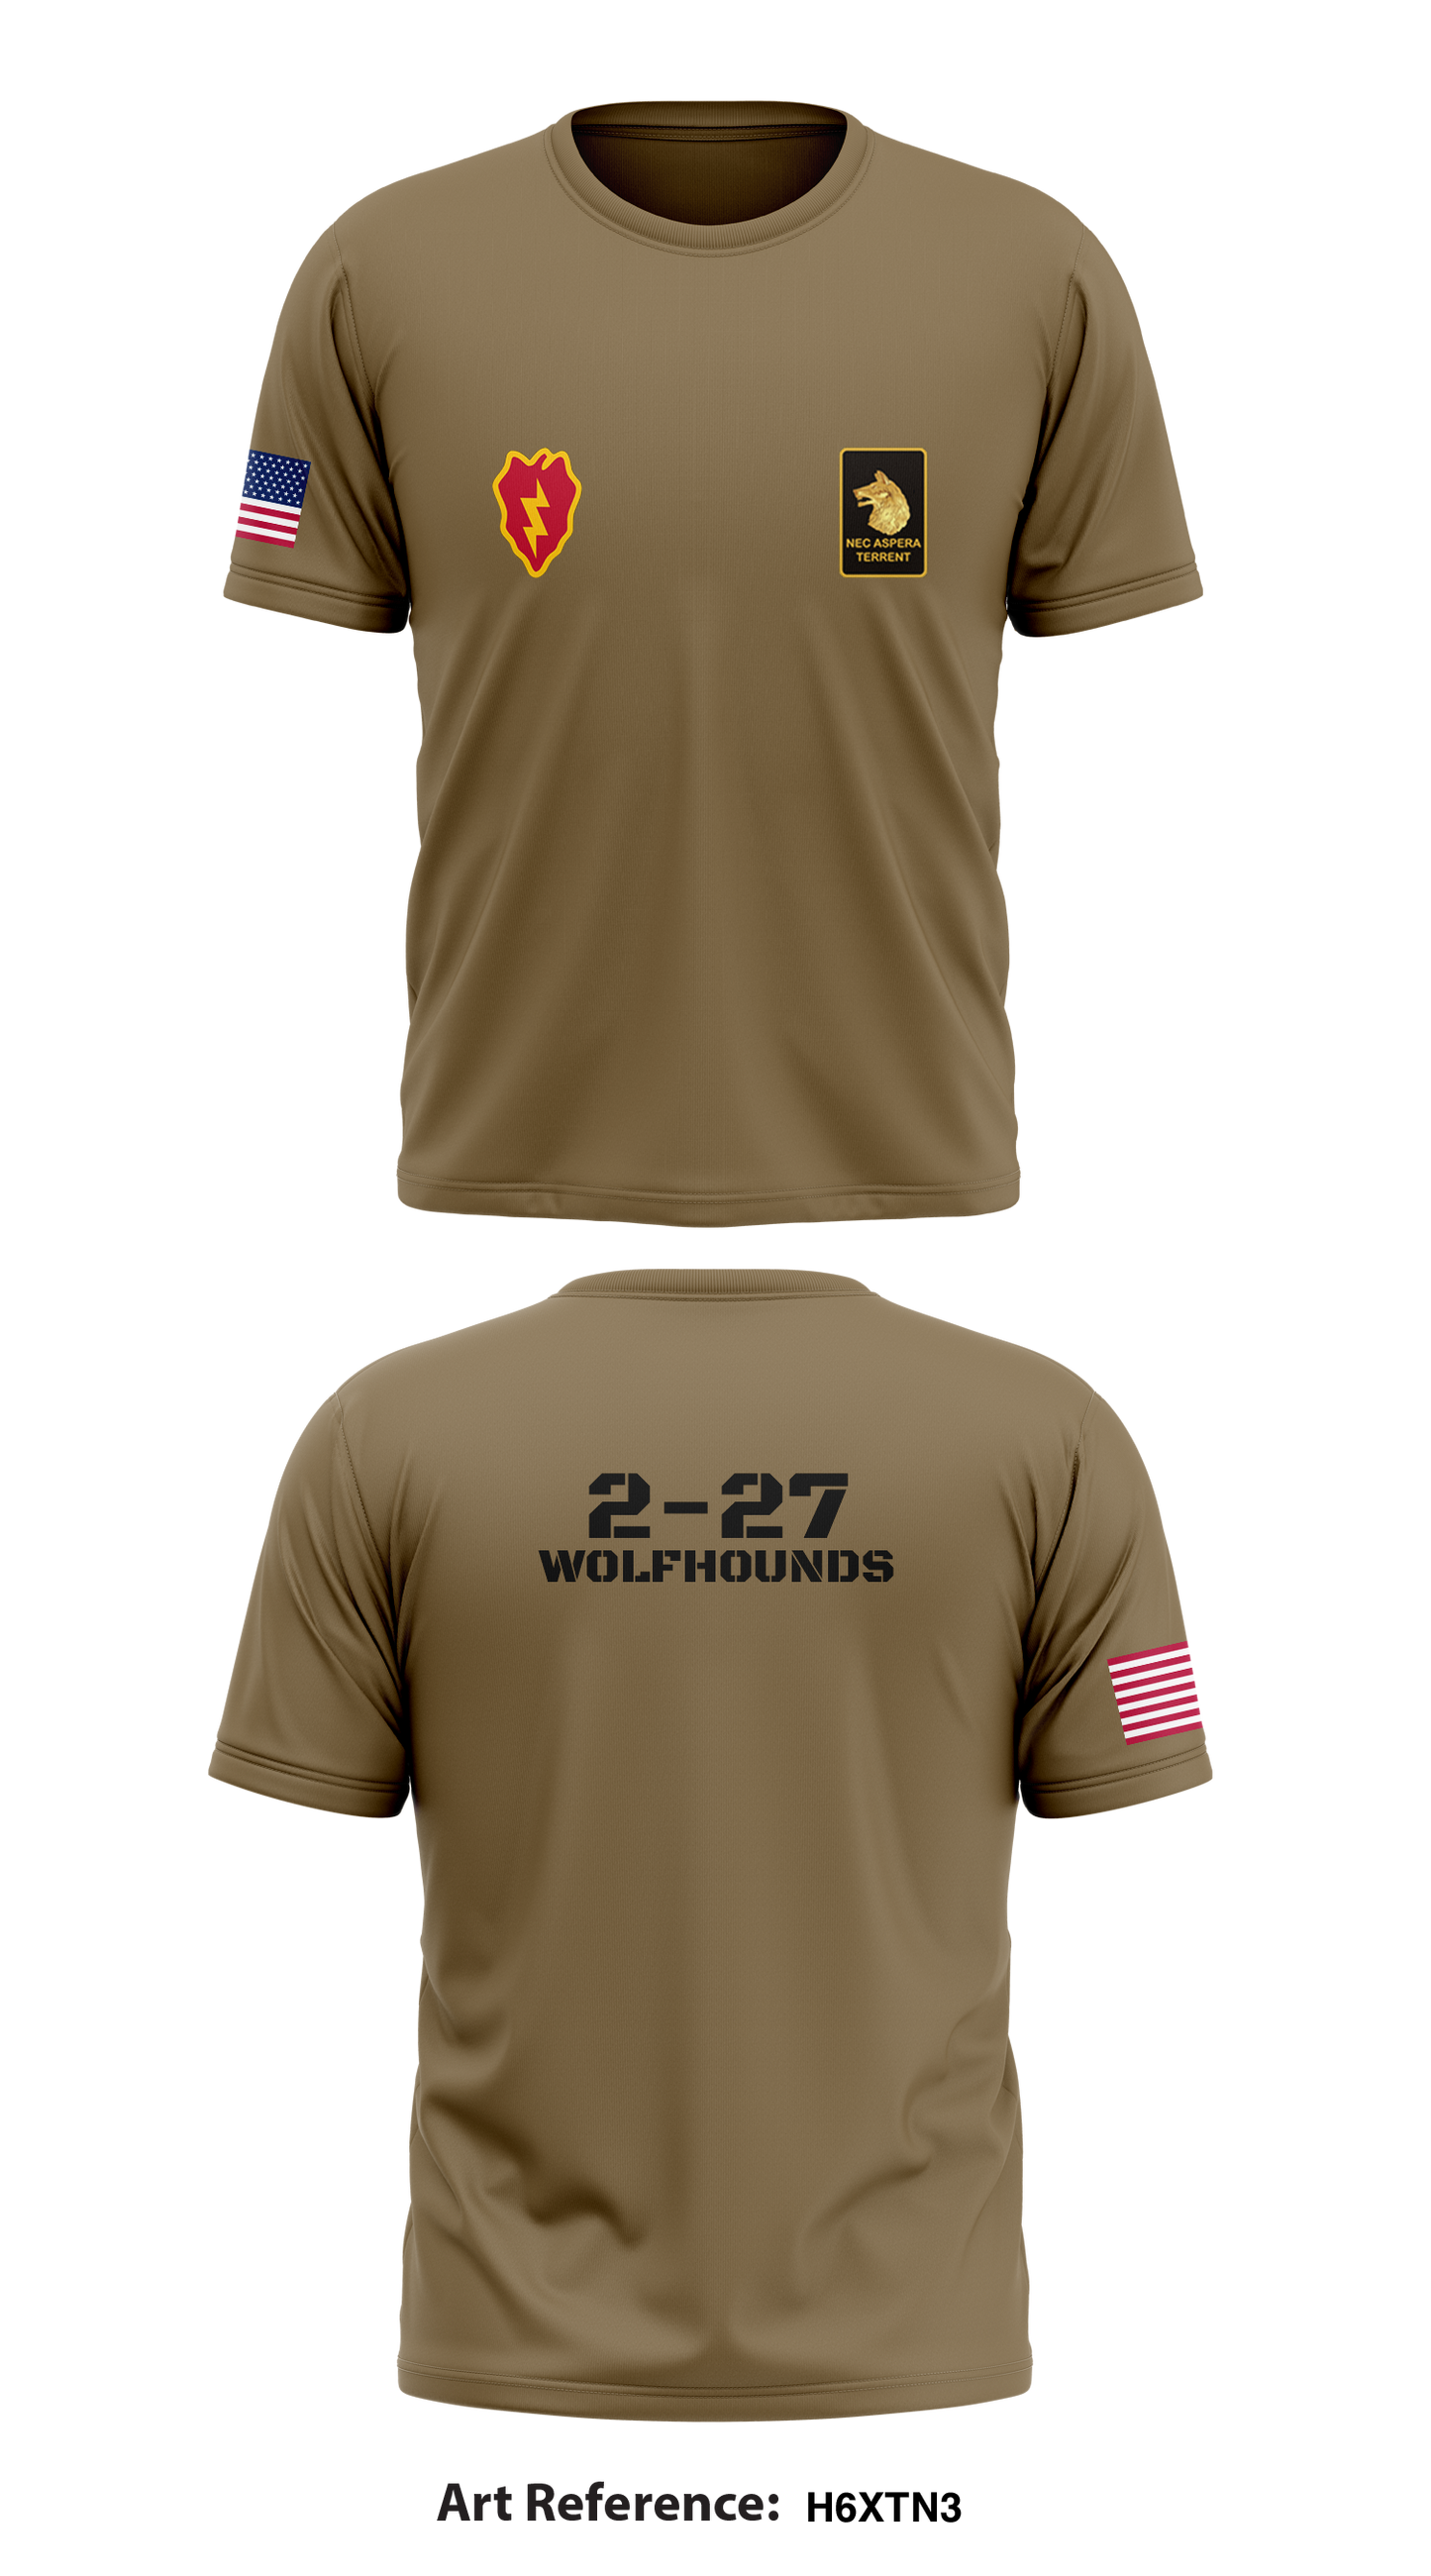 2-27 Wolfhounds Store 1 Core Men's SS Performance Tee - H6XTN3